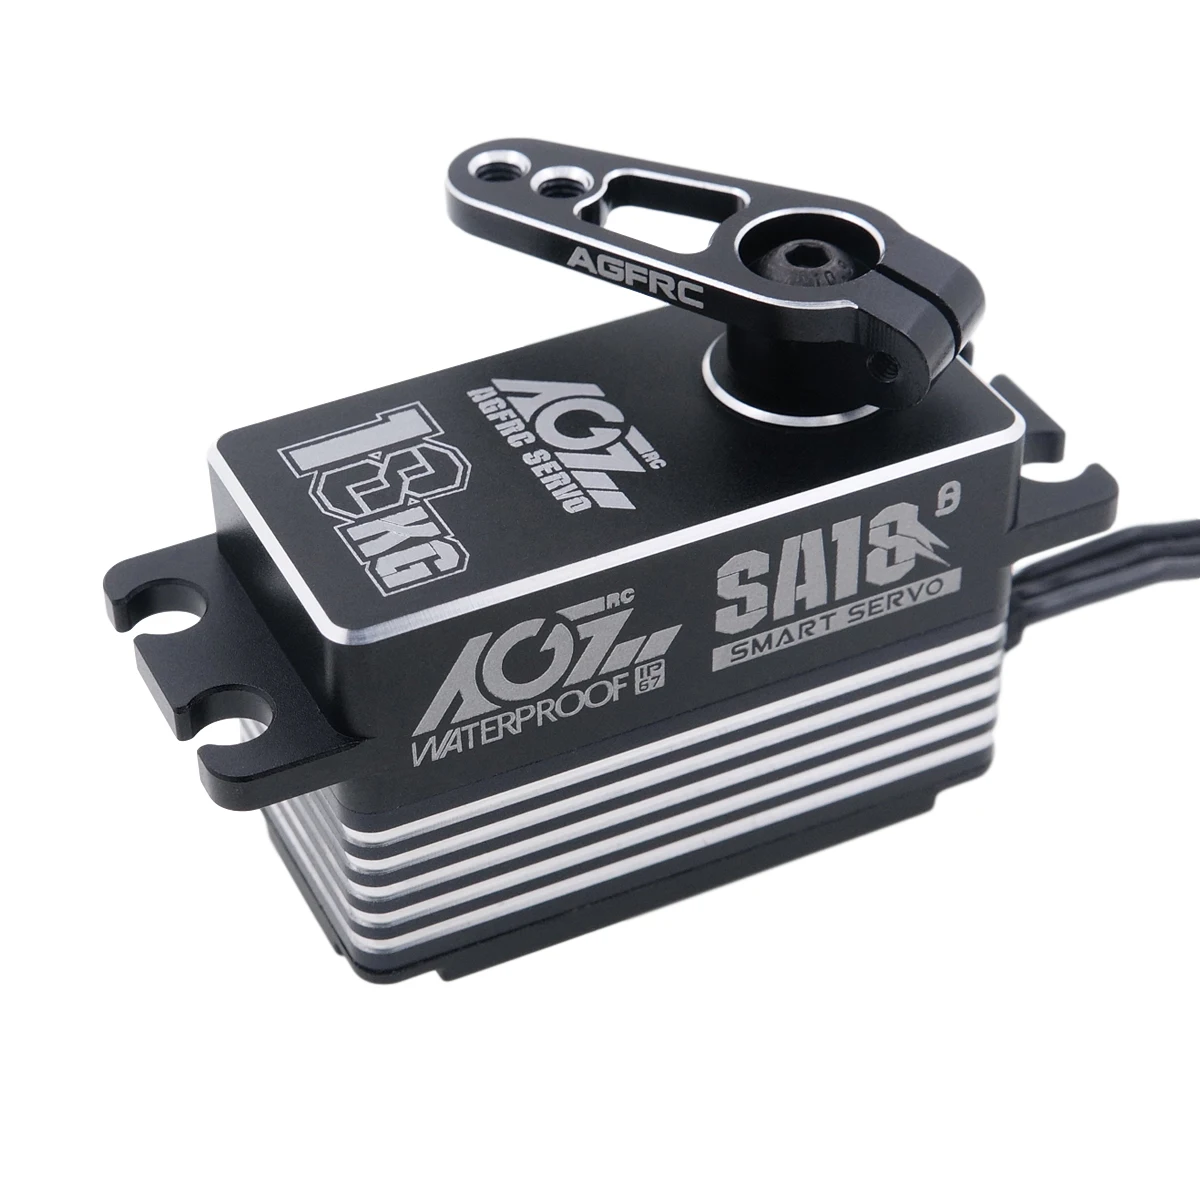 AGFRC SA18 250oz-in High Torque Magnetic Angle Sensor Programmable Low Profile Smart Servo For 1/RC Car Aircraft Model Winch enlarge